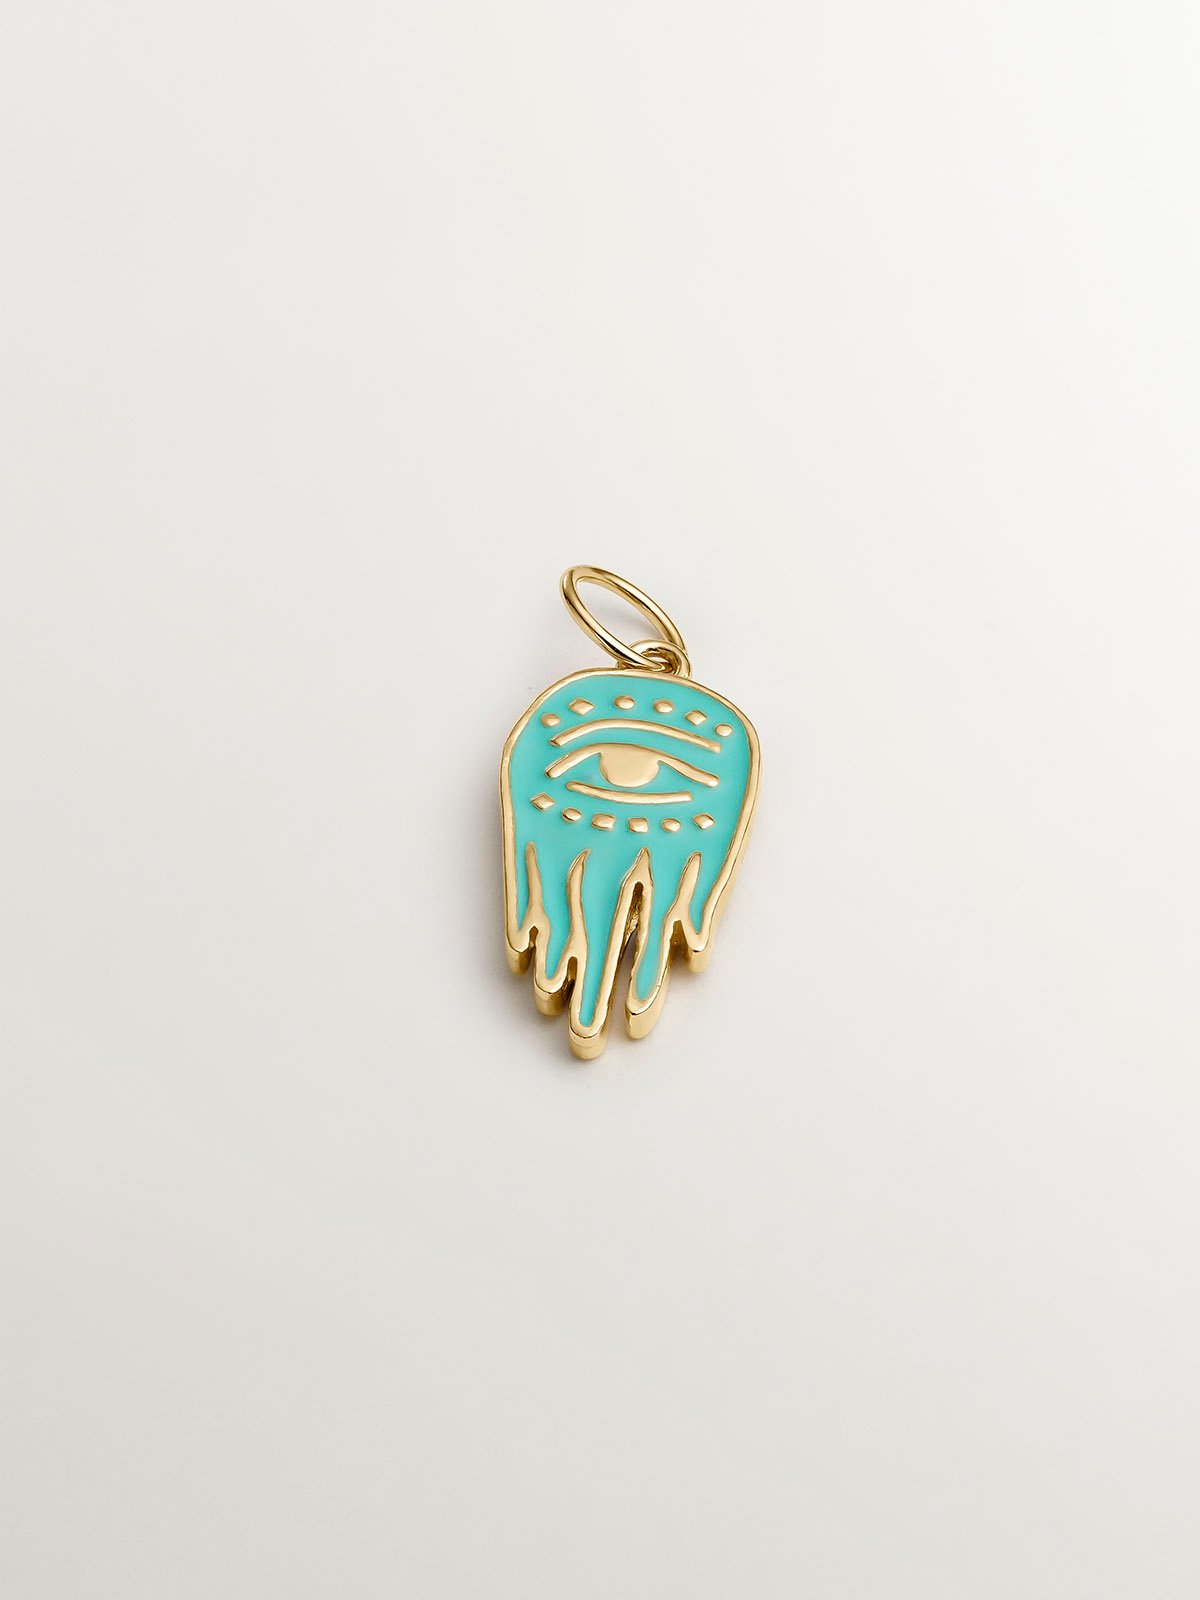 925 Silver charm bathed in 18K yellow gold with turquoise enamel and Hand of Fatima.